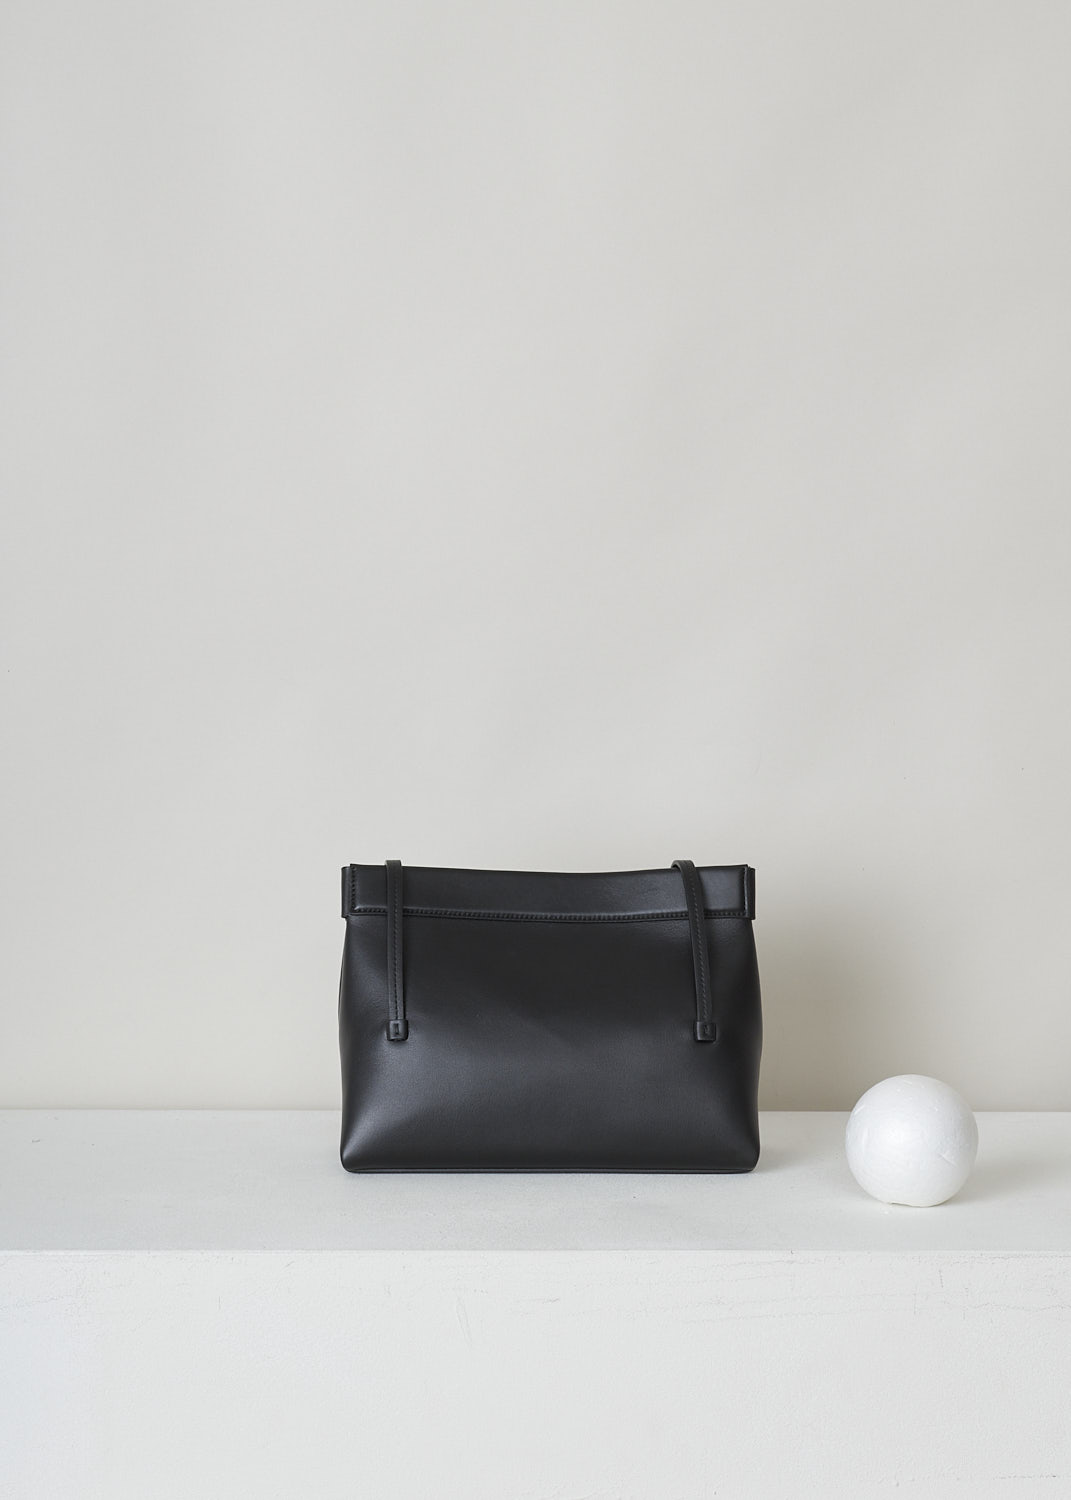 WANDLER, JOANNA MINI BAG IN BLACK, JOANNA_BAG_MINI_BLACK_22108100391, Black, Back, This black Joanna mini hand bag has slim top handles. The magnetic strip closure opens up to the single spacious compartment. On the front, the brand's lettering can be found in gold.  

